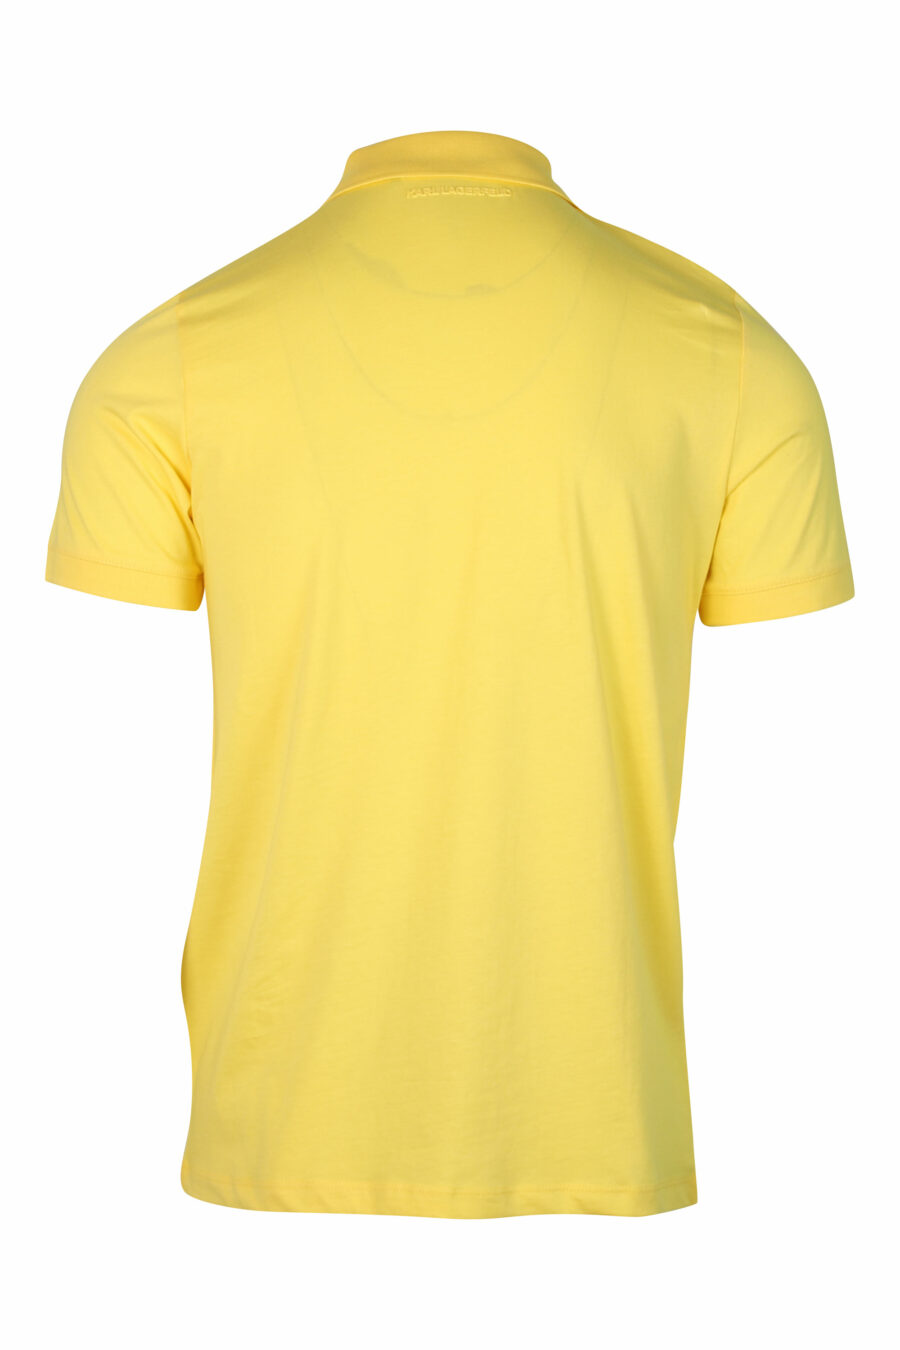 Yellow polo shirt with zip and minilogue - 4062226276047 2